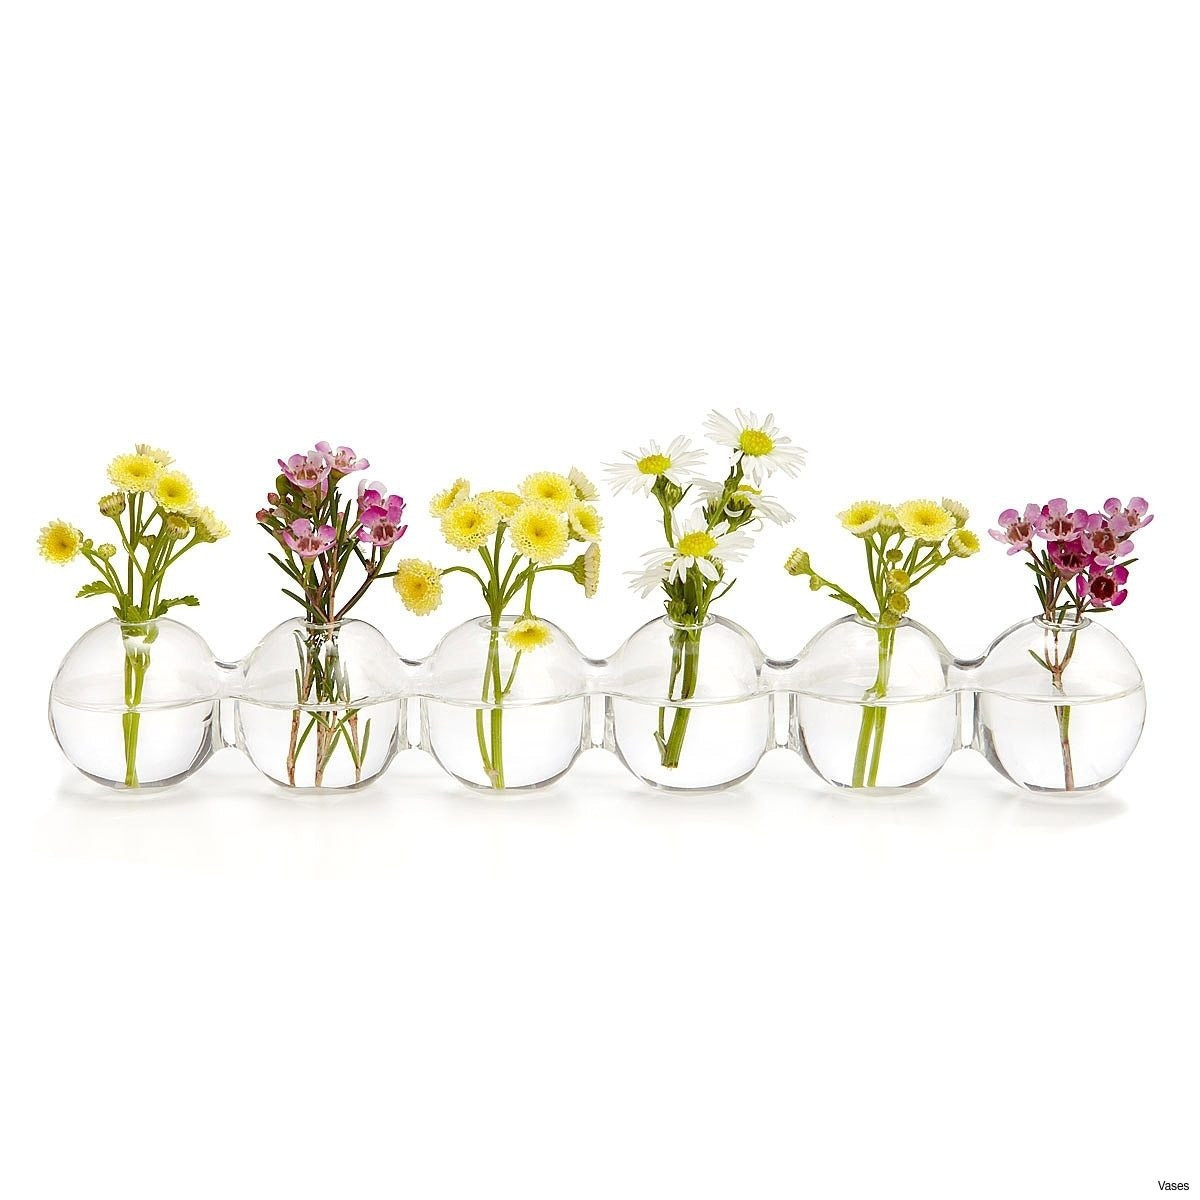 28 Cute Mini White Bud Vases 2024 free download mini white bud vases of bulk bud vase gallery bud vase in 28case 29 glass 29h vases small pertaining to bud vase in 28case 29 glass 29h vases small bulk case i 0d scheme